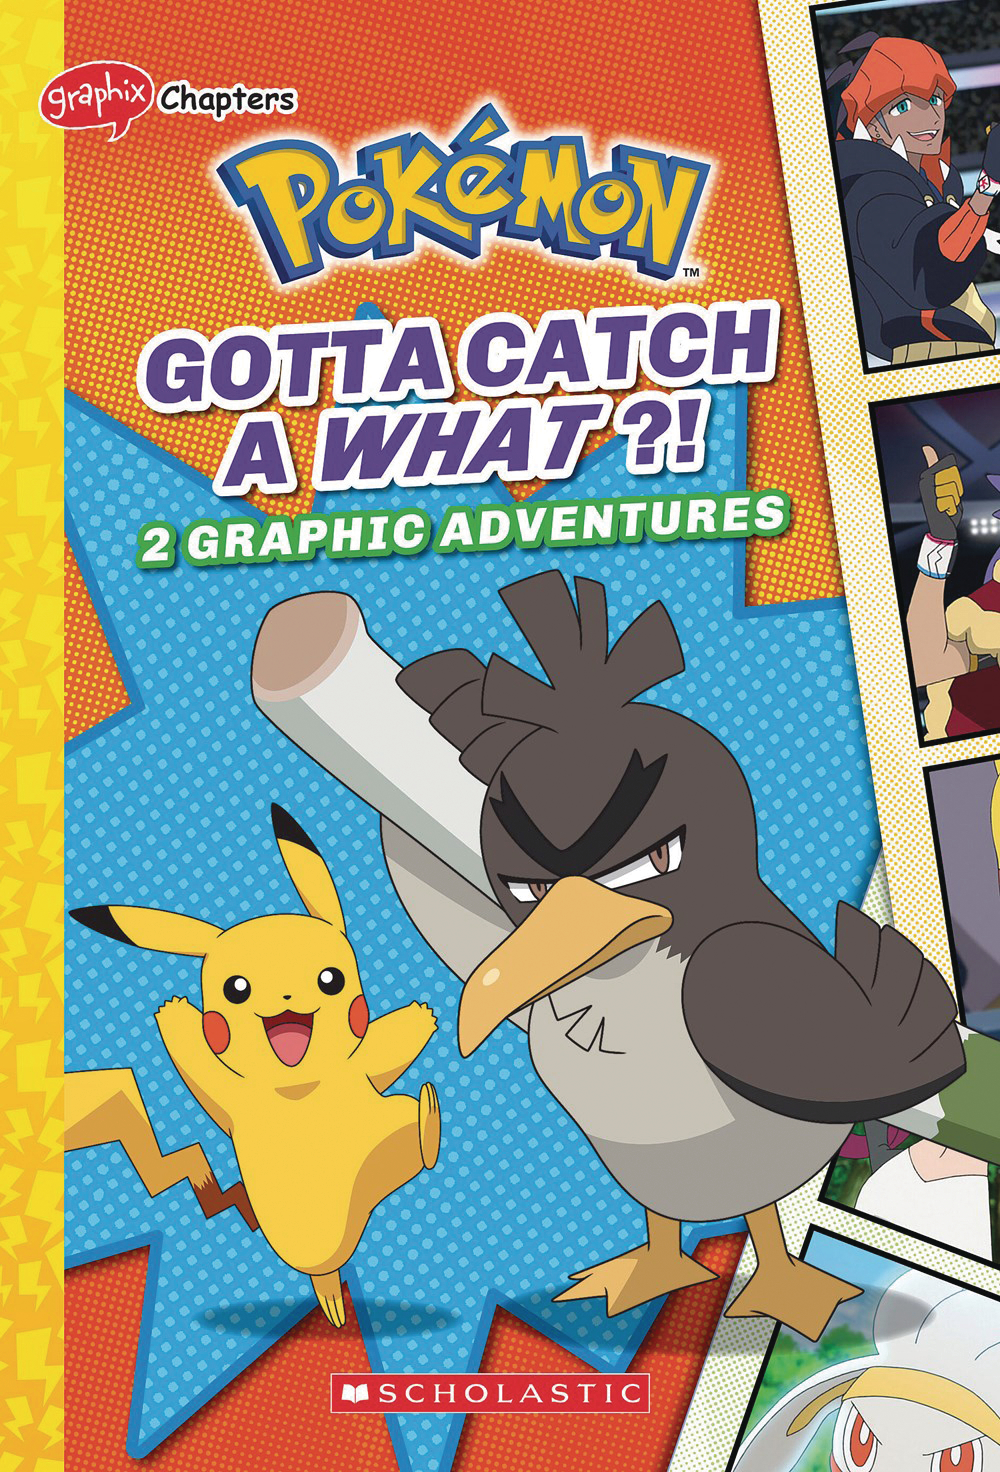 Pokémon Graphic Collected Graphic Novel Volume 3 Gotta Catch A What